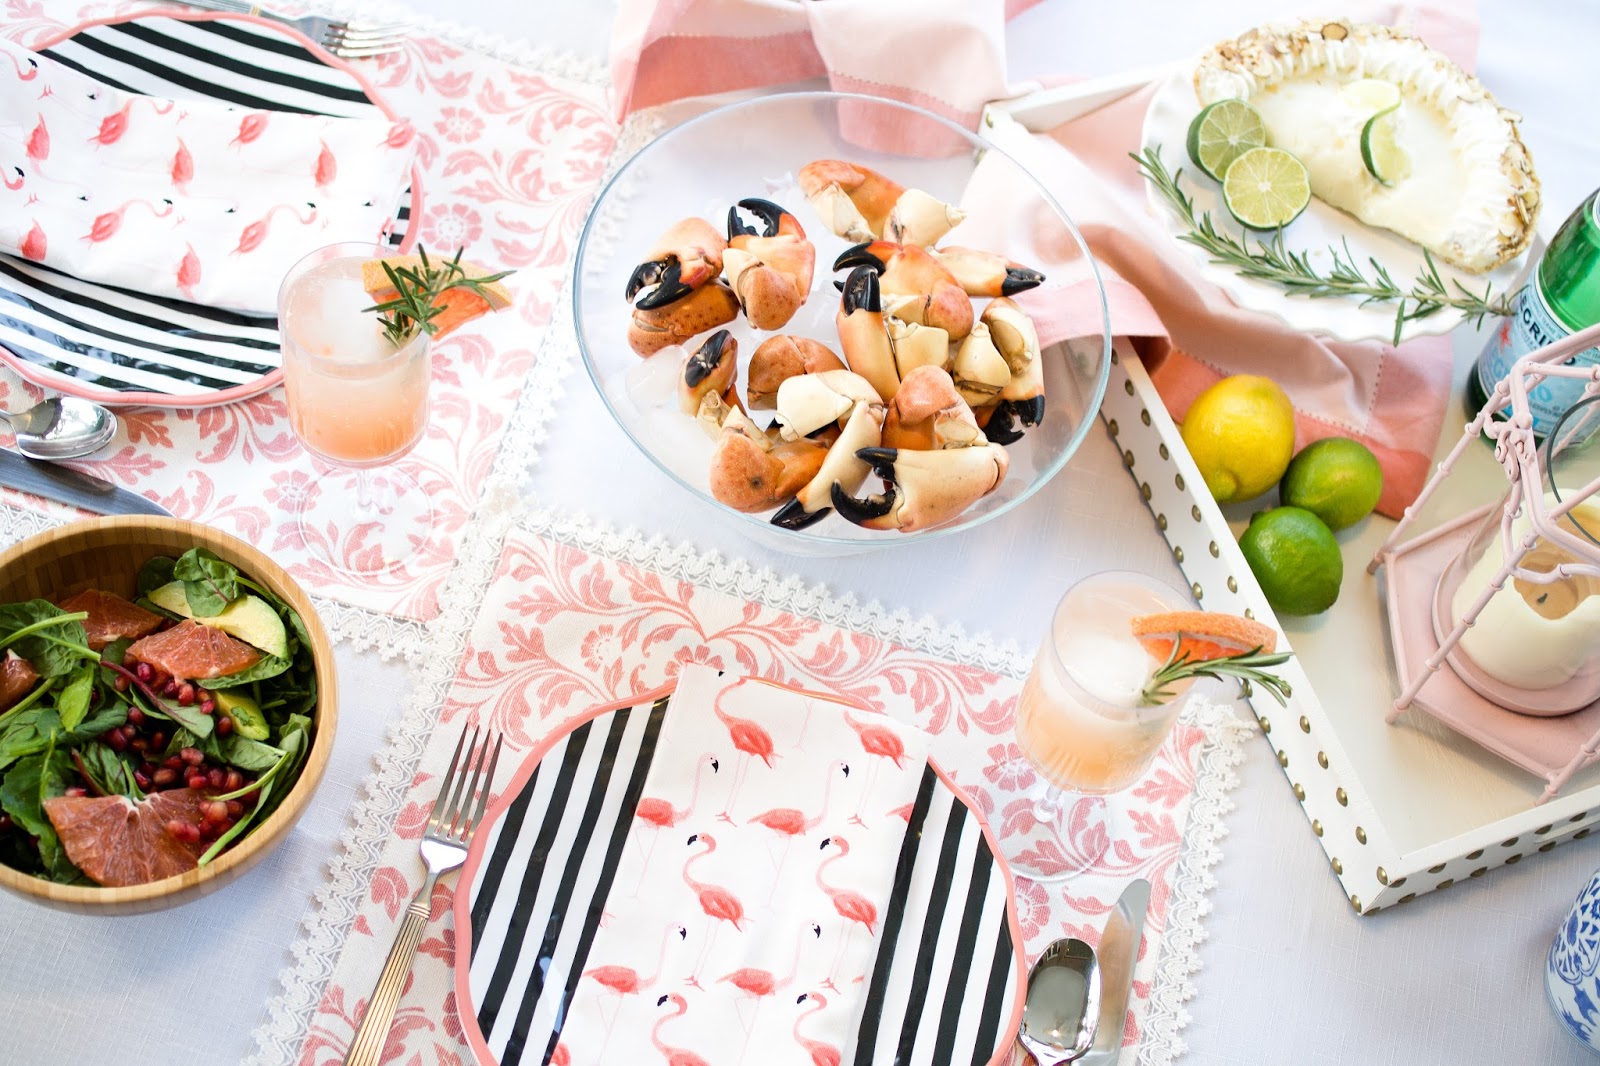 Take outdoor dining to the next level with chic décor and a no-fuss summer meal